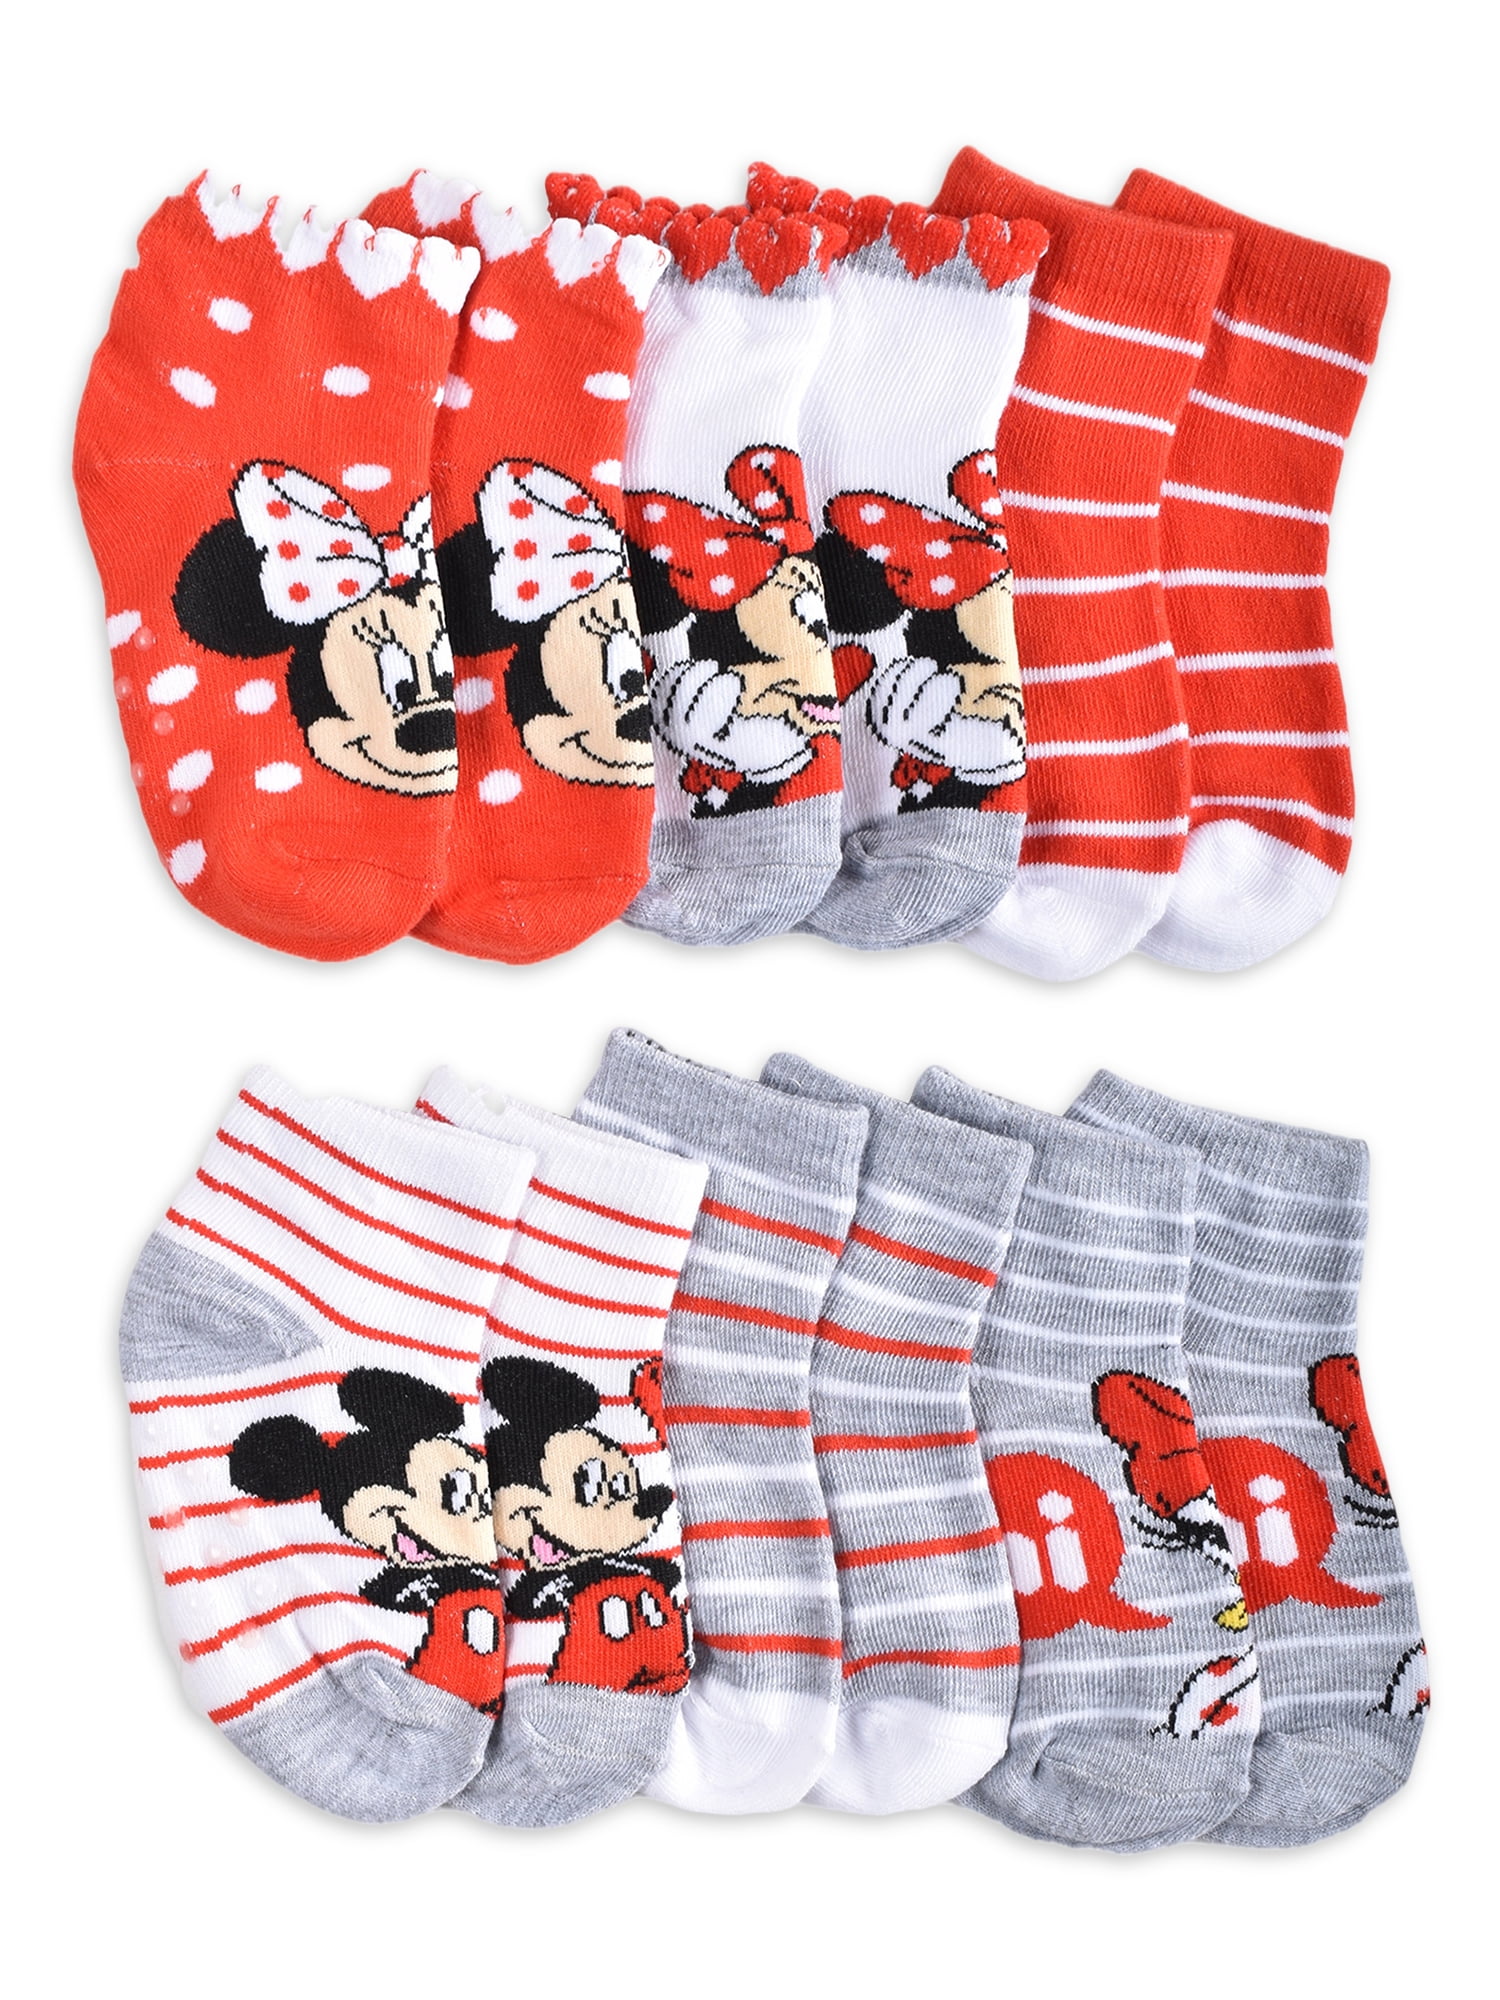 Disneys Minnie Mouse Character 6 Pairs No Show Socks 